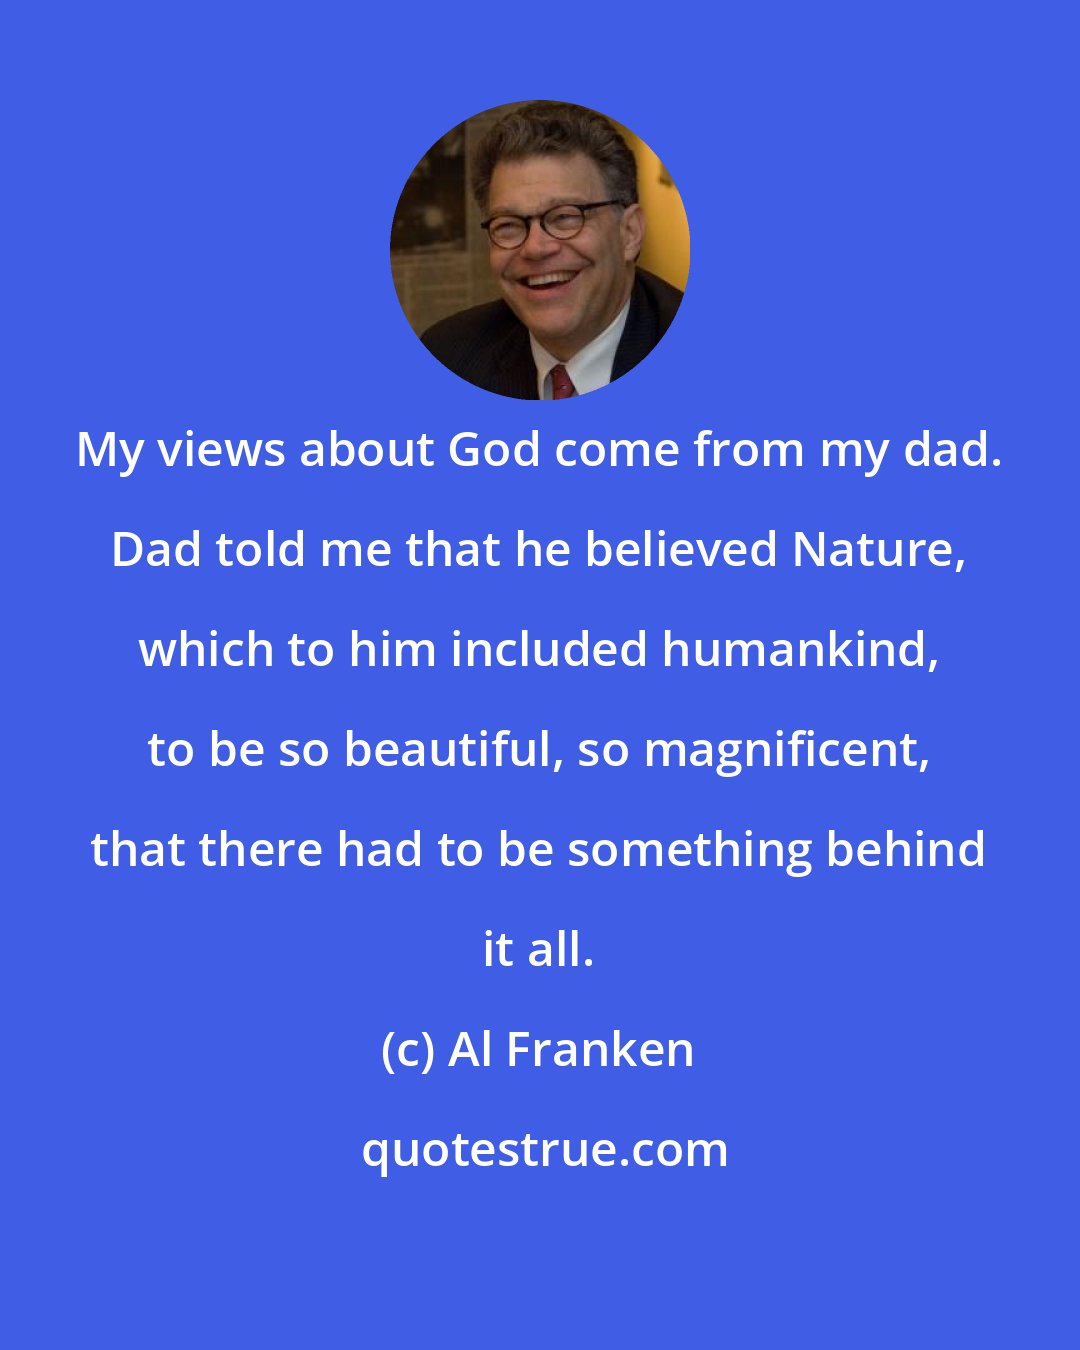 Al Franken: My views about God come from my dad. Dad told me that he believed Nature, which to him included humankind, to be so beautiful, so magnificent, that there had to be something behind it all.